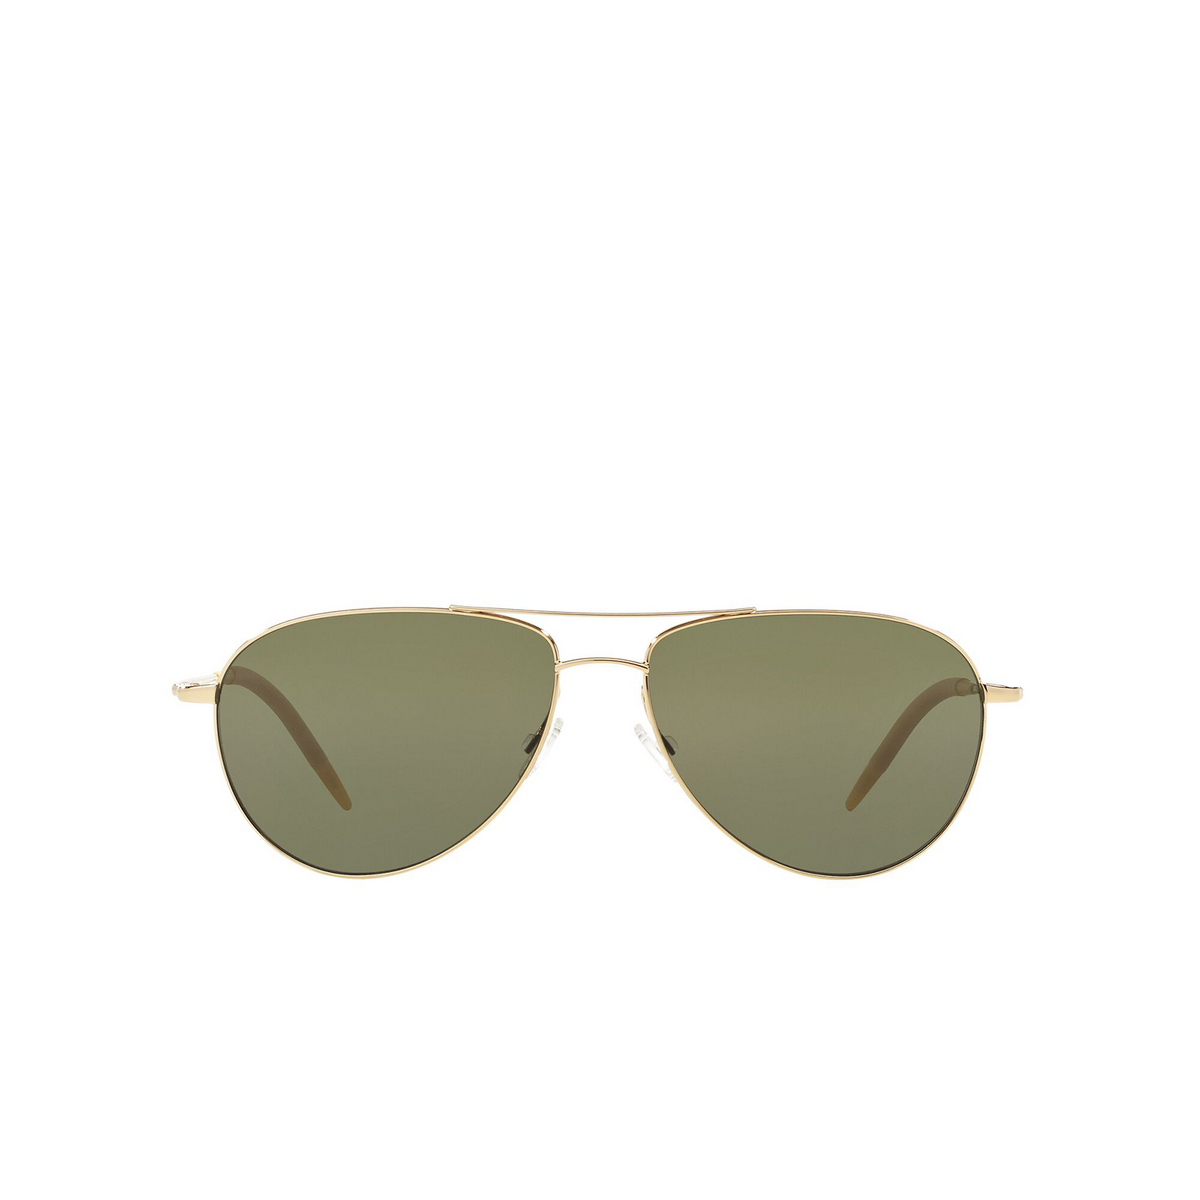 Oliver Peoples® Aviator Sunglasses: Benedict OV1002S color Gold 5035P1 - front view.